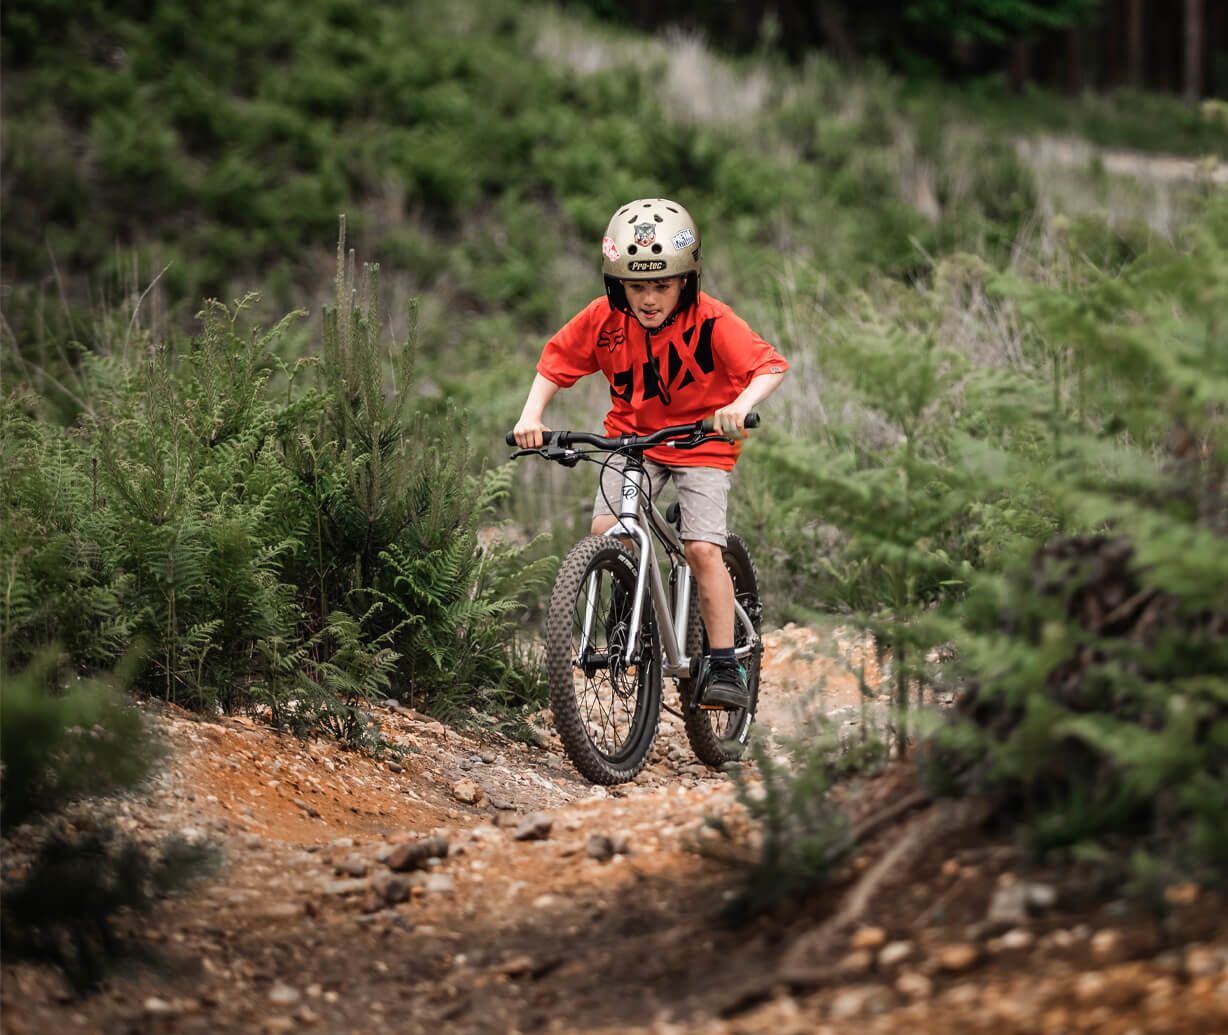 No compromise bikes for kids – Early Rider®